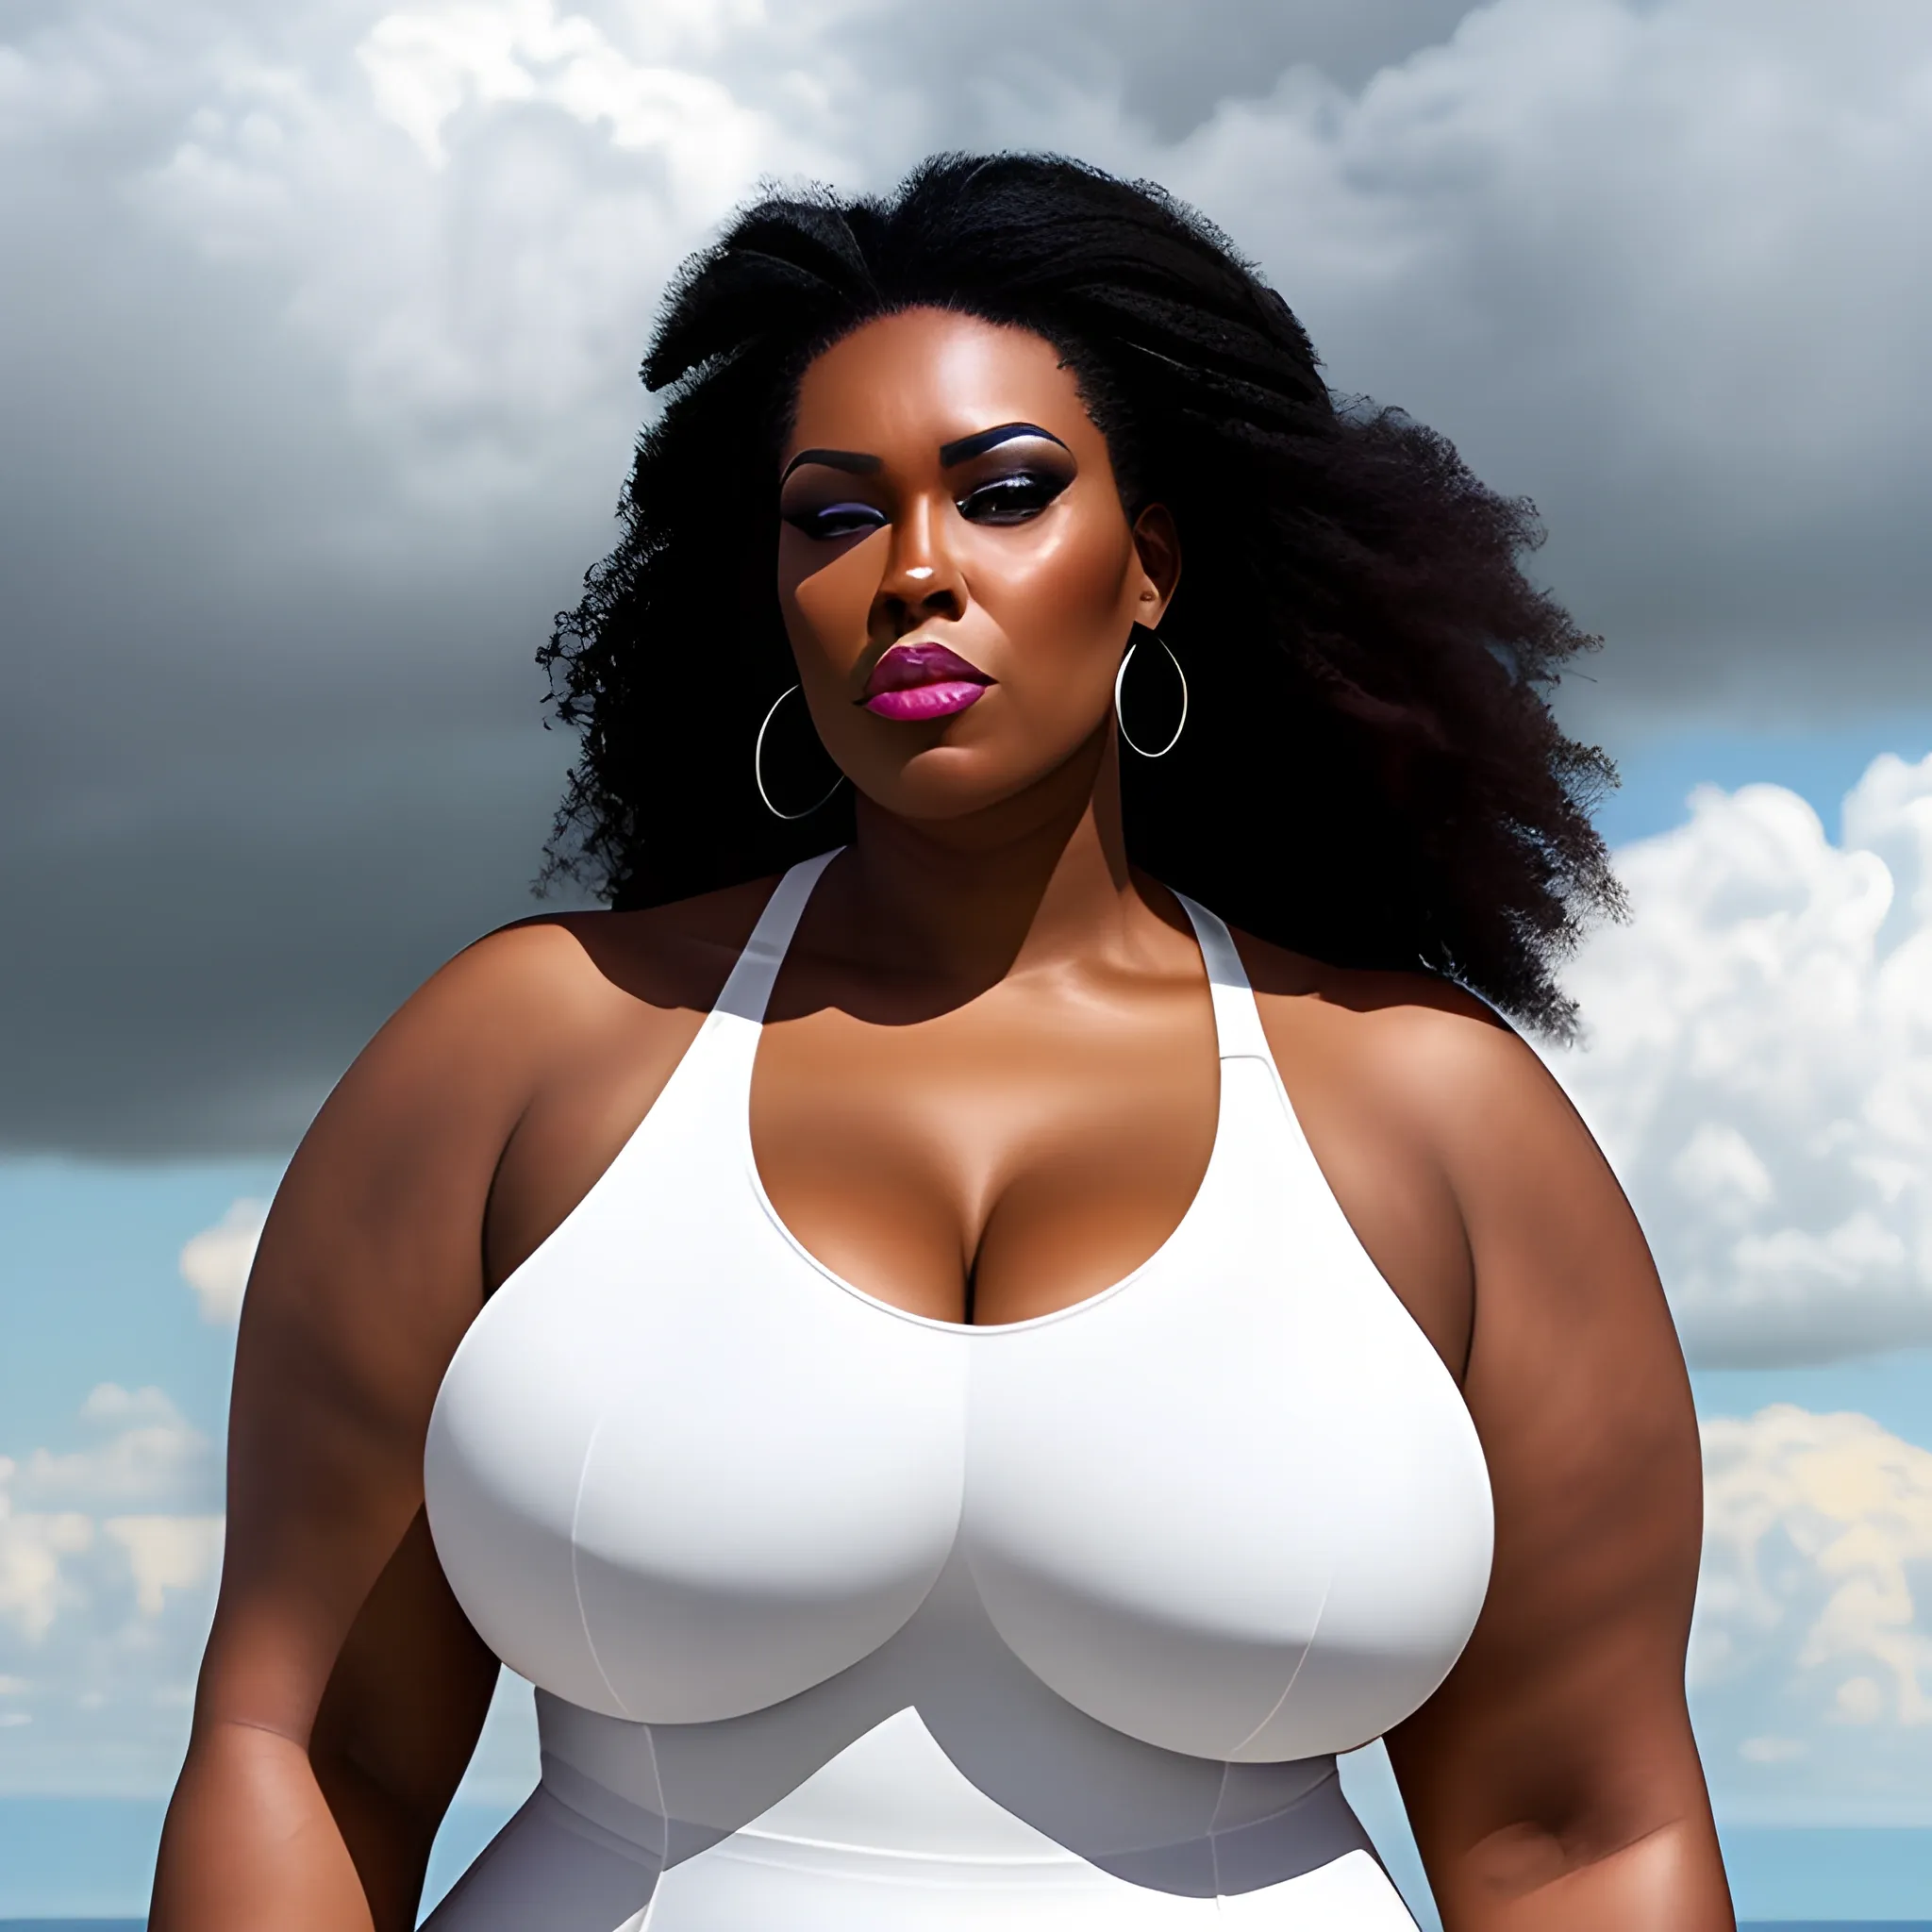 extremly tall, huge, massive plus size and muscular beautiful black girl in plain tight white dress, with very broad shoulders, long neck, small narrow head with long chin standing out, towerring under the clouds and looking down to us